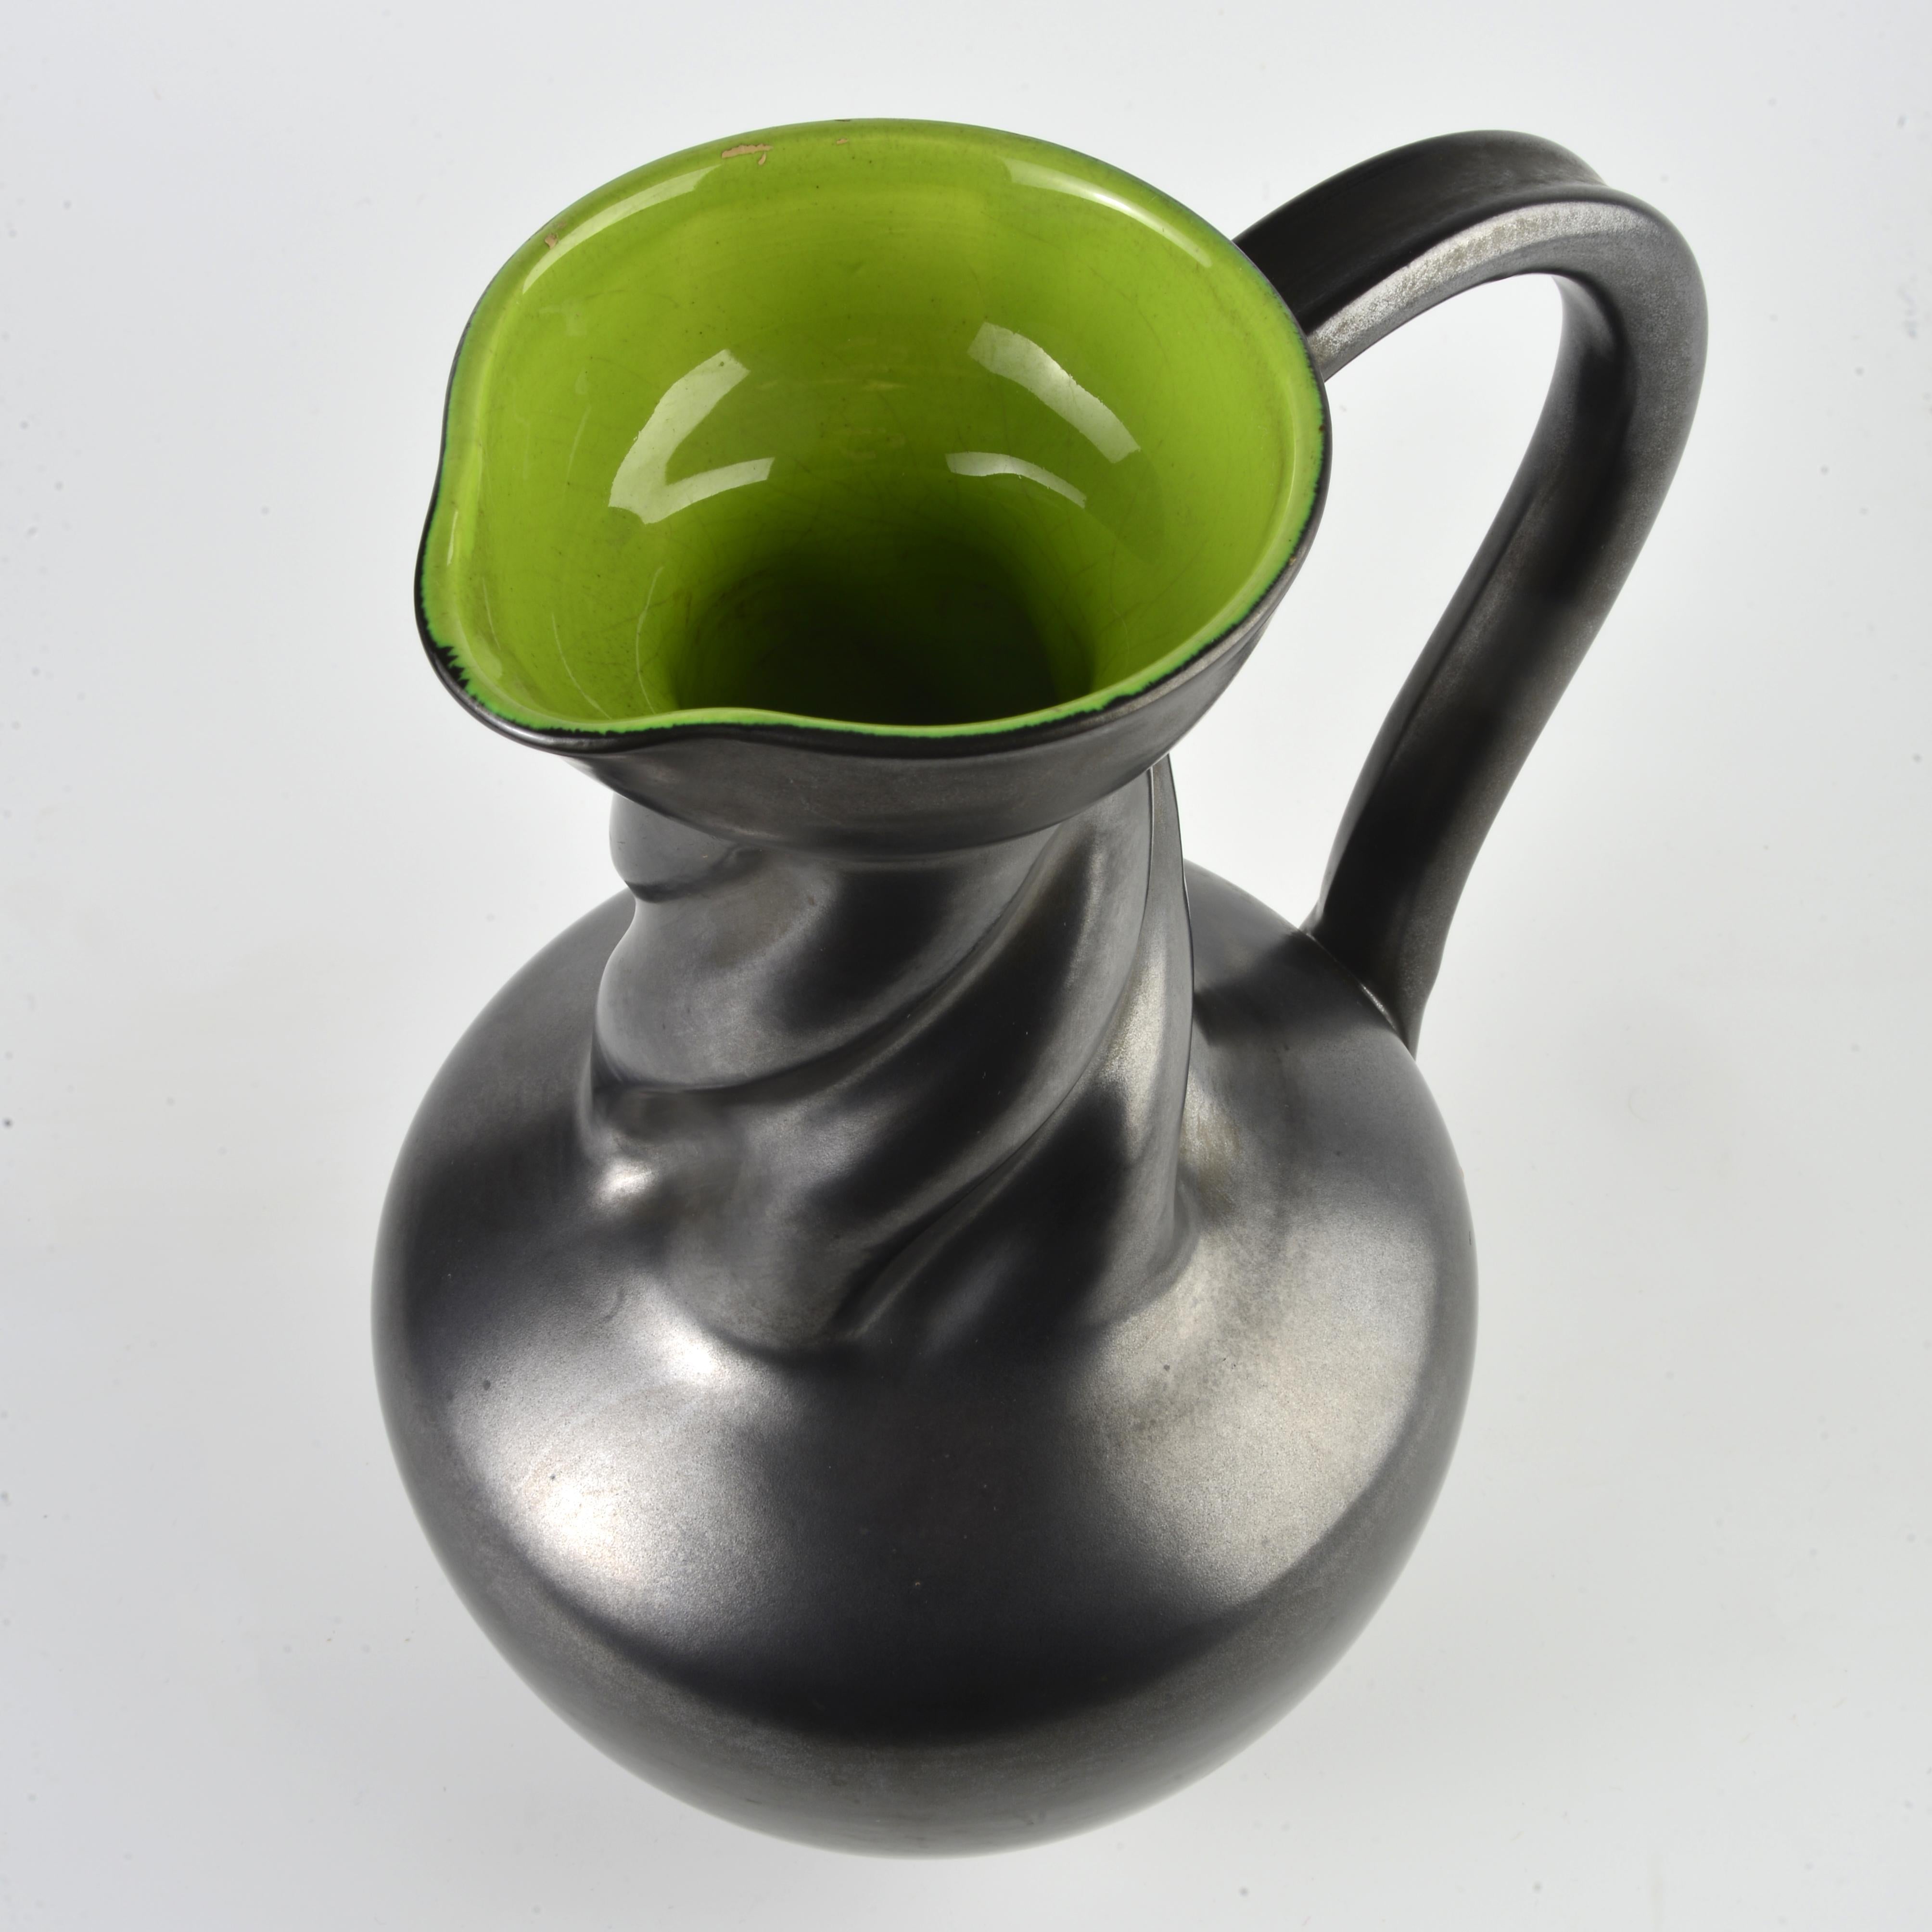 Glazed earthenware pitcher from the 1950s/60s by the Elchinger factory, grey/black satin glaze on the outside and bright green on the inside. H:29cm

The Elchinger factory, named after its creator, operated in Alsace from 1834 to 2016. At the